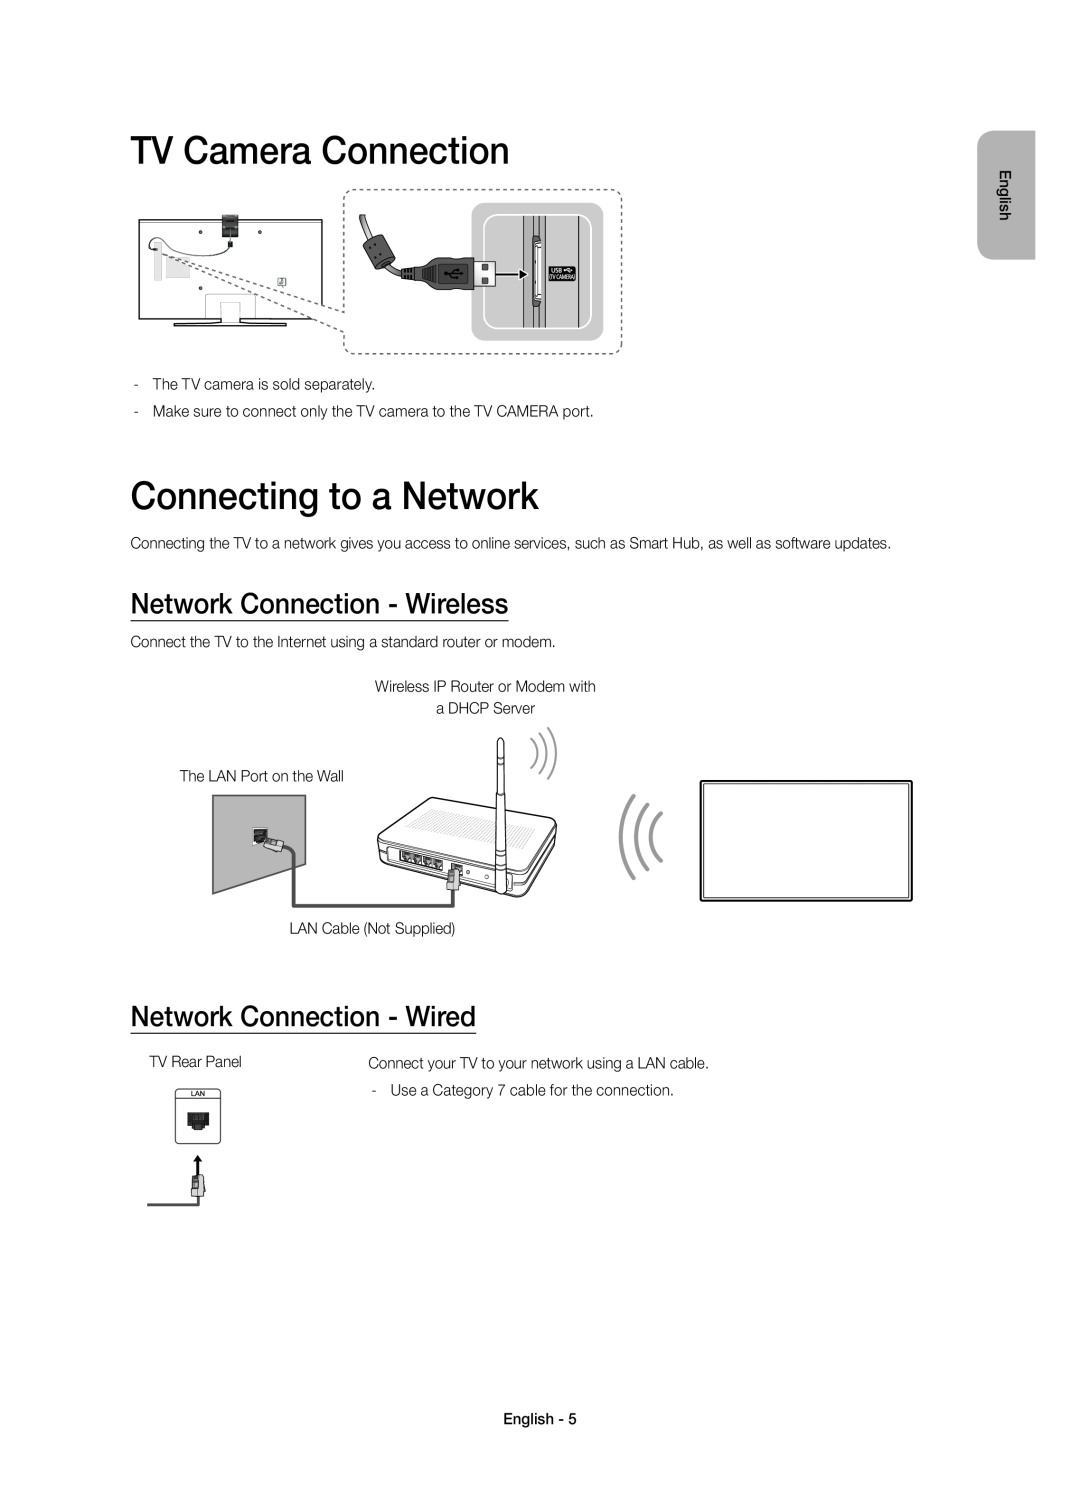 Samsung UE65JU6400KXZF, UE48JU6440WXXH manual TV Camera Connection, Connecting to a Network, Network Connection - Wireless 